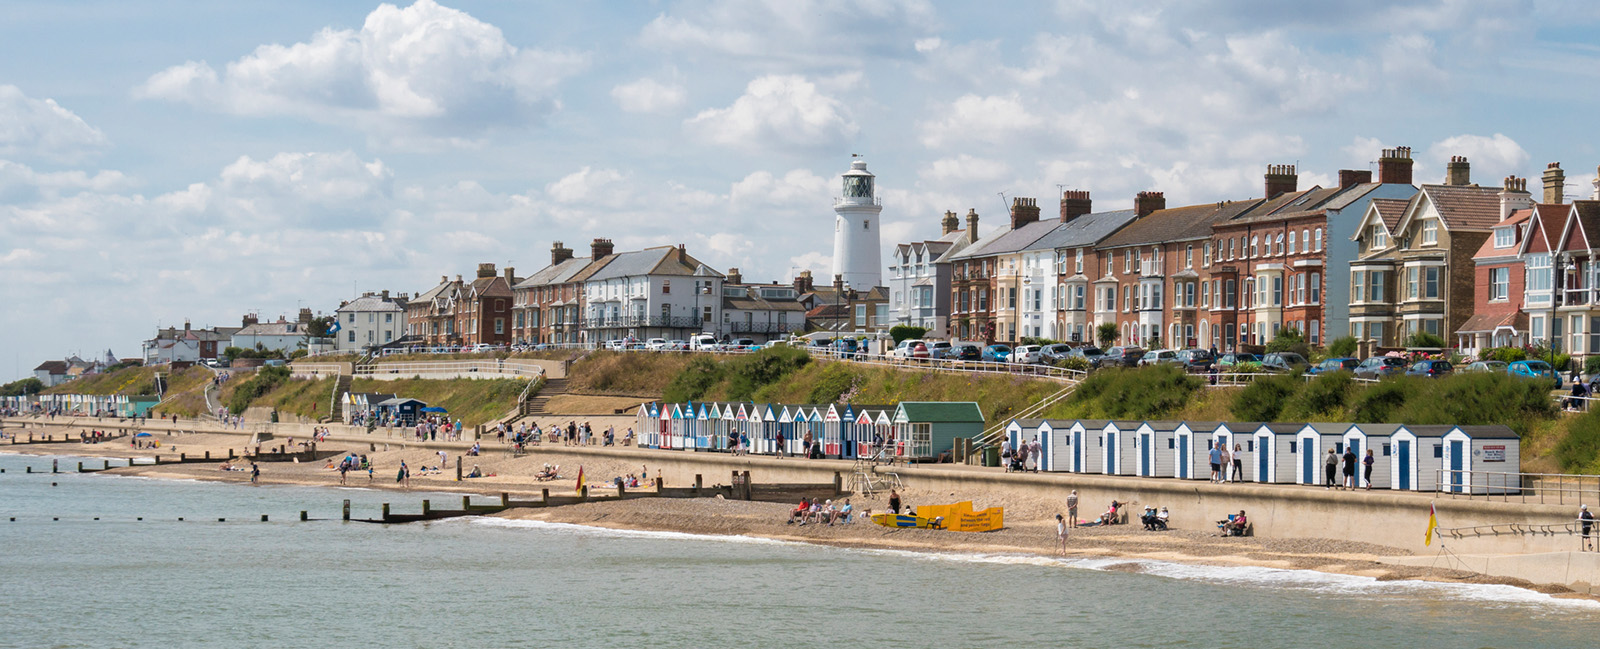 View of the seafront and beach at Southwold, Suffolk UK